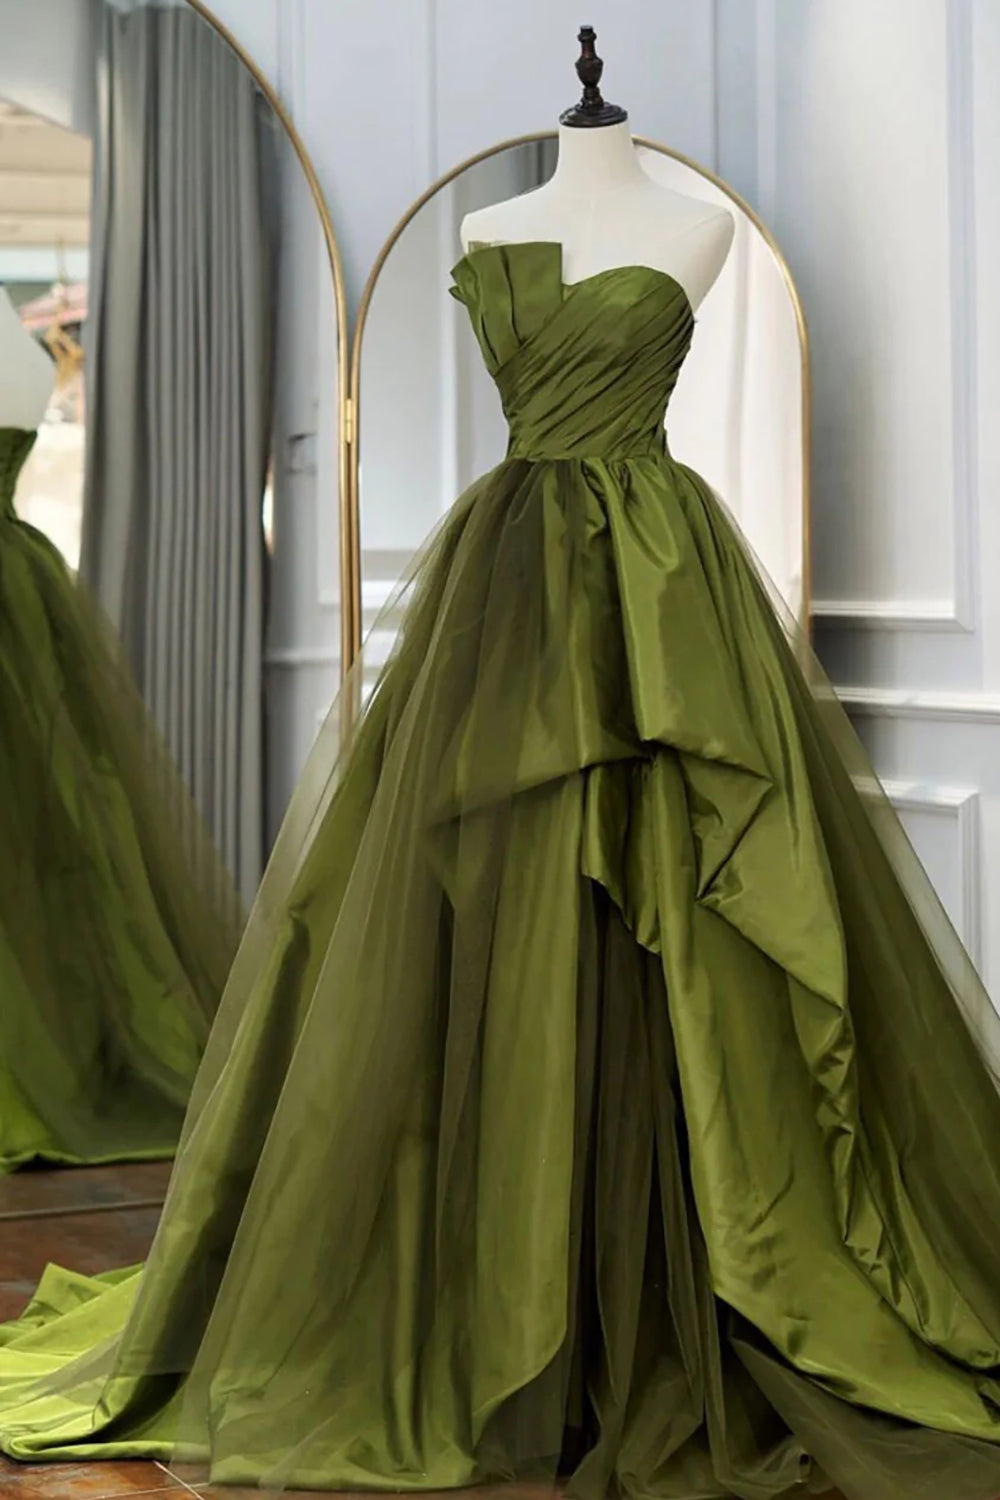 A Line Asymmetrical Strapless Green Long Corset Prom Dress with Ruffles Gowns, Bridesmaid Dresses Mismatched Summer